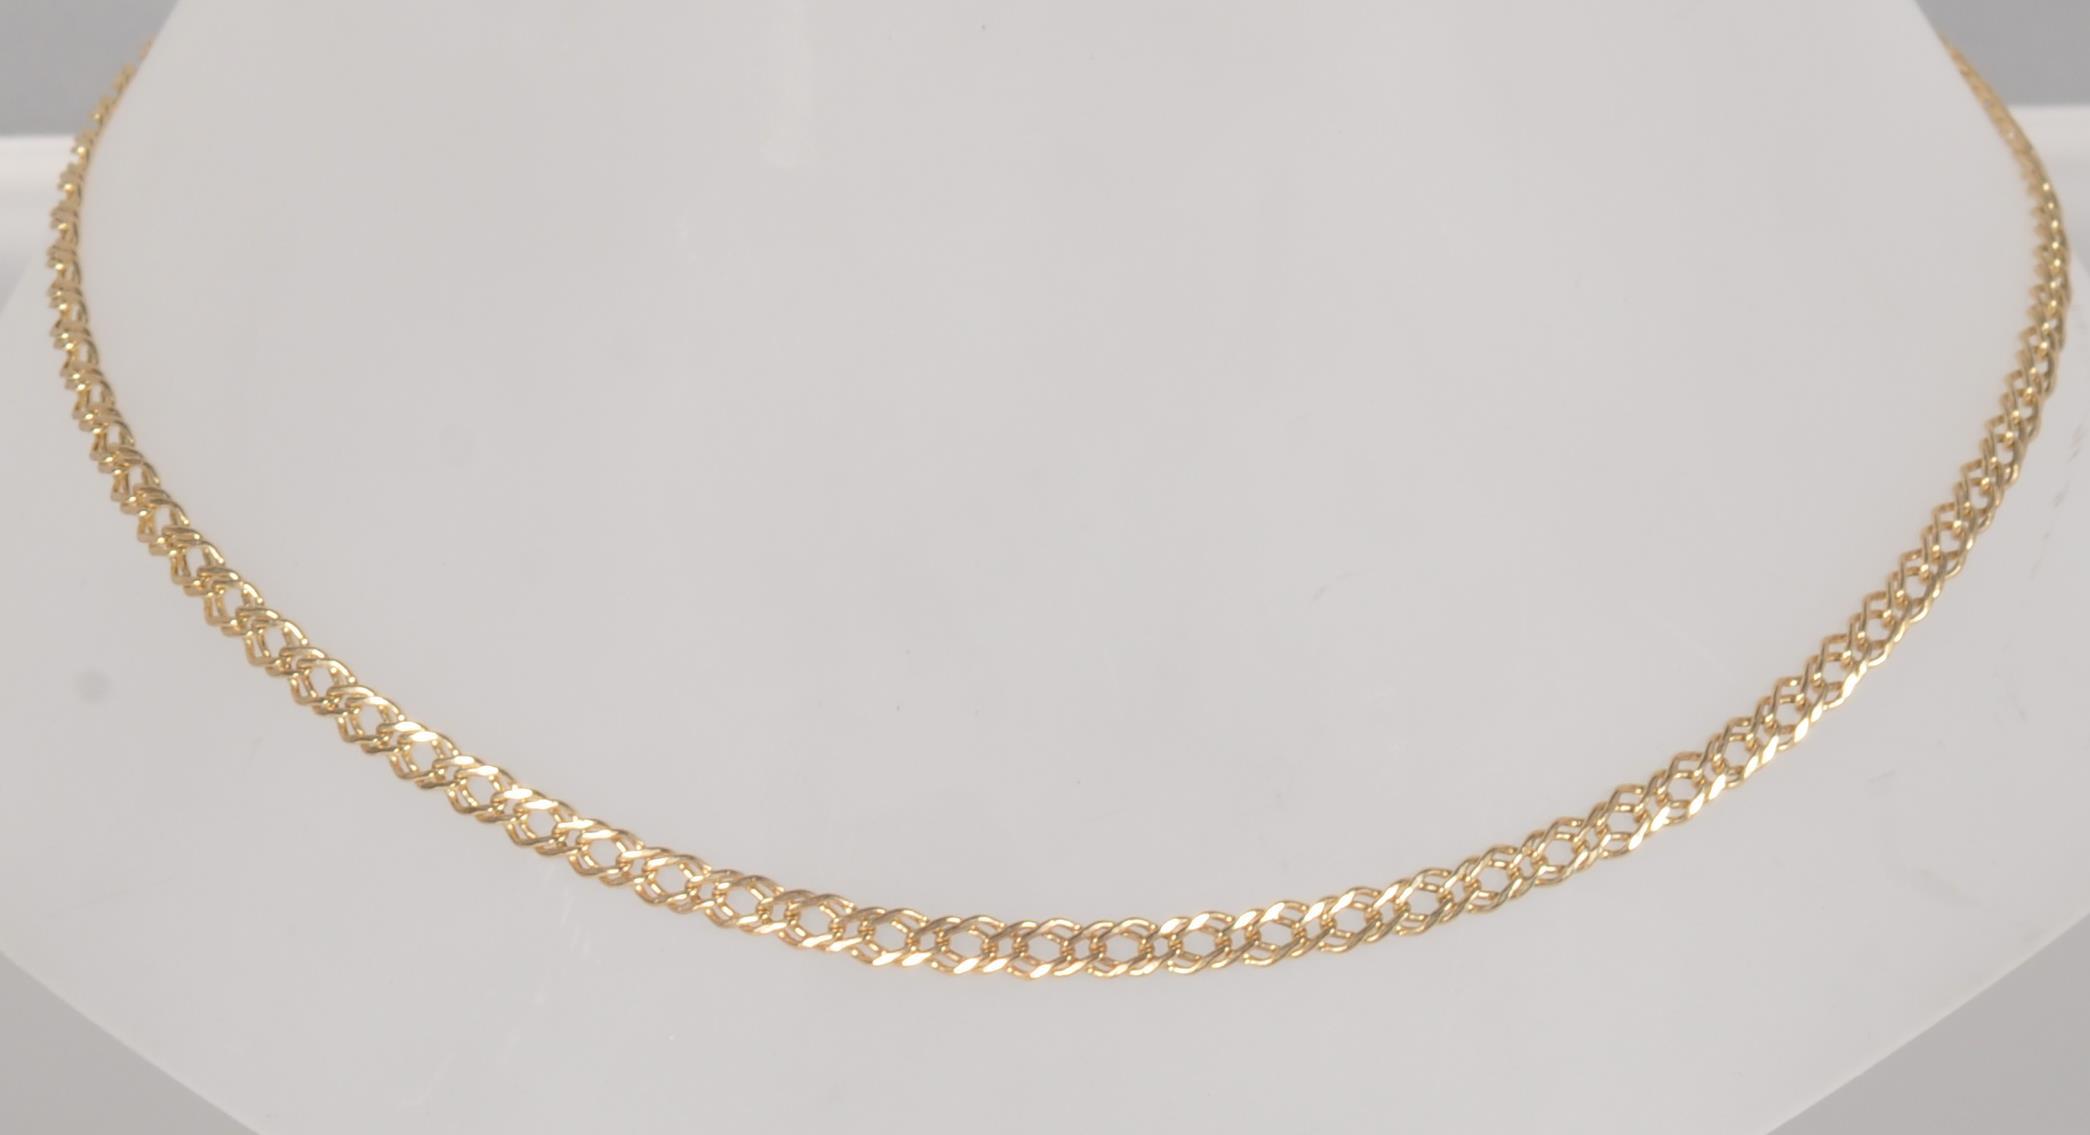 A yellow metal double curb link chain18 inch length, bolt ring clasp.